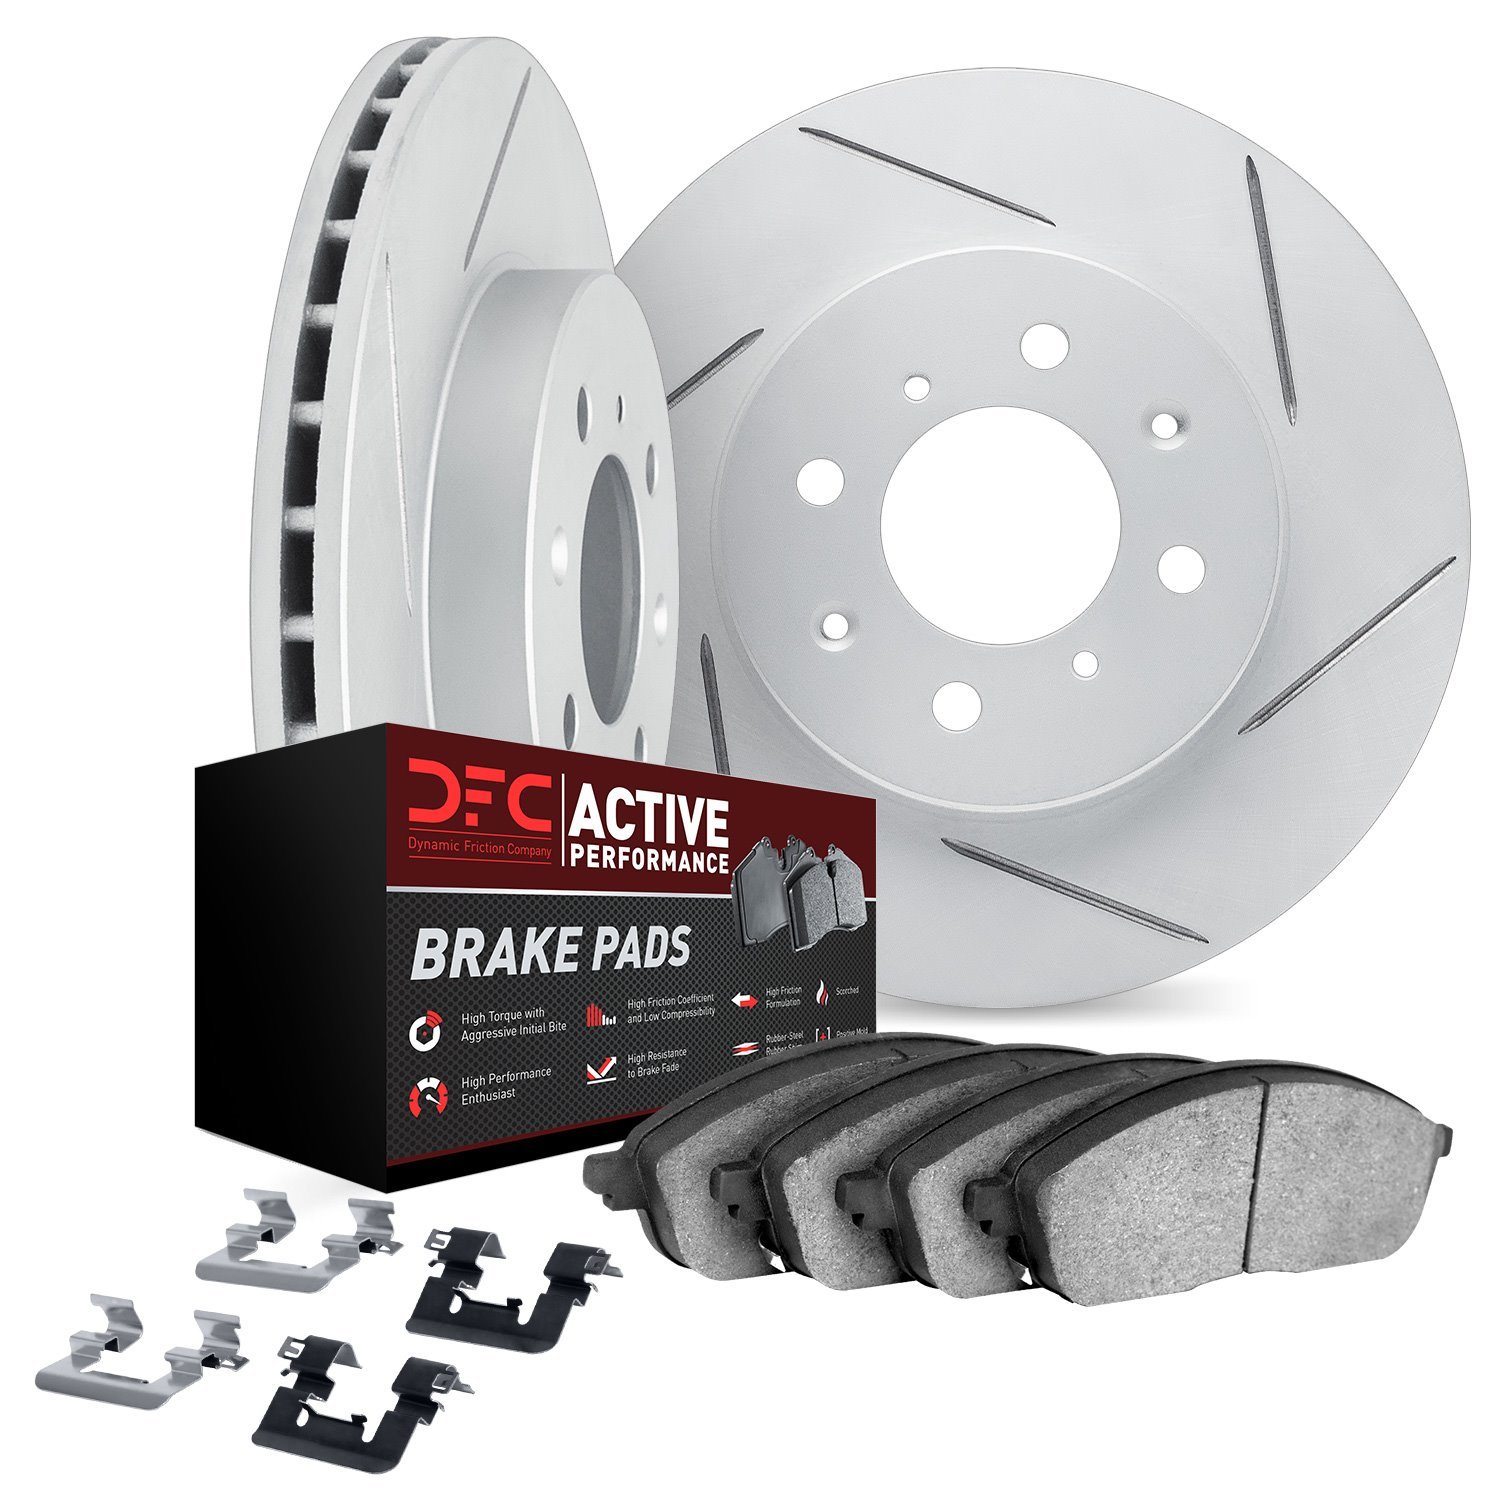 2712-67000 Geoperformance Slotted Brake Rotors with Active Performance Pads Kits & Hardware, 1989-2006 Infiniti/Nissan, Position